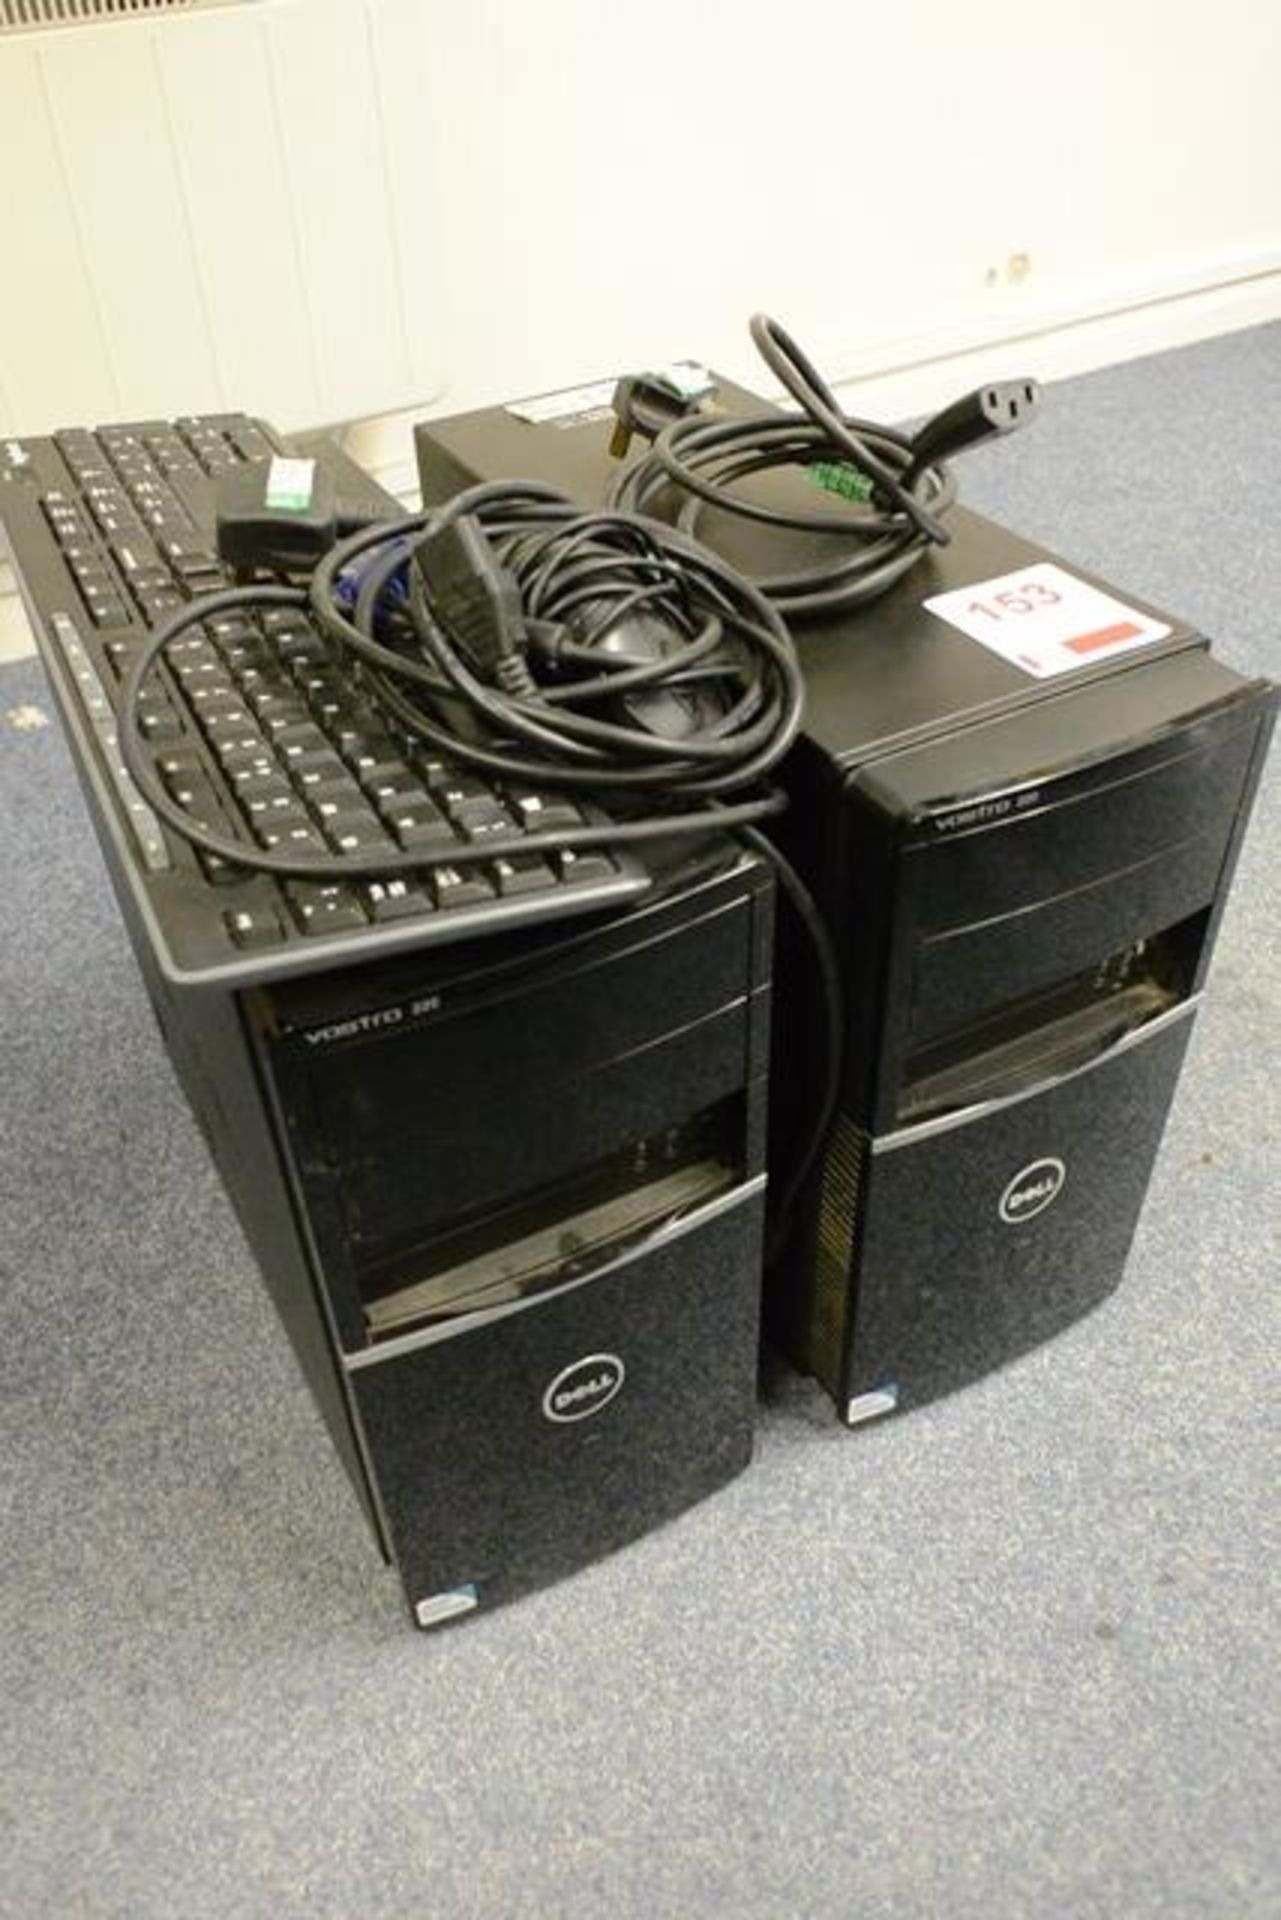 Two Dell Vostro 220 desktop PC's (please note: This lot is located at the Swindon premises)